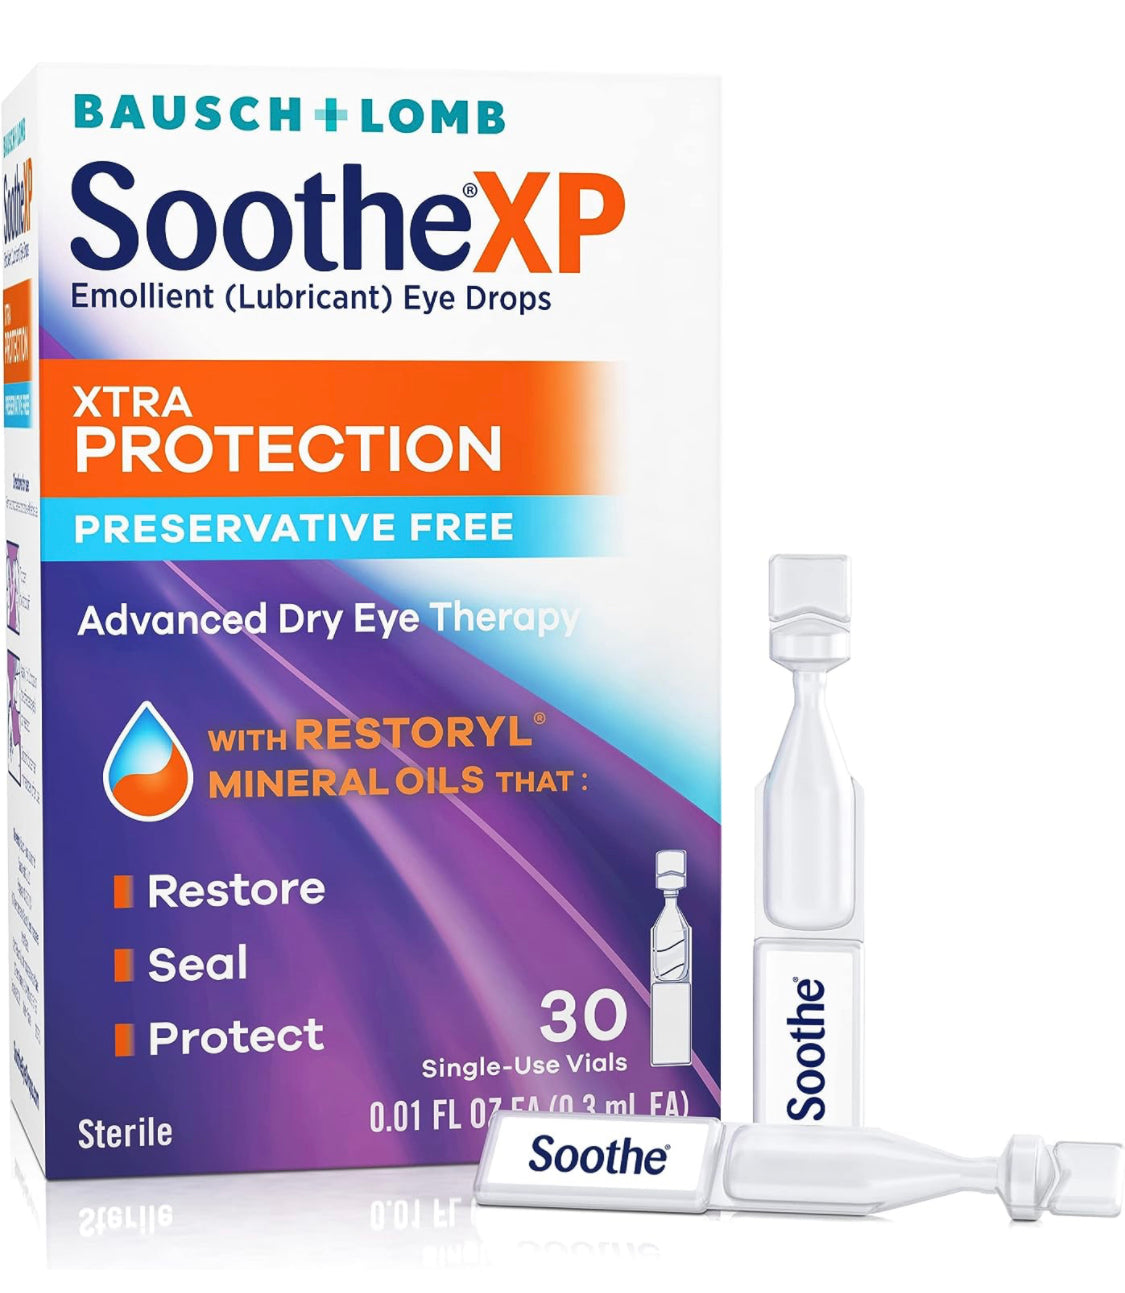 Soothe Preservative-Free Lubricant Eye Drops, Bausch + Lomb, Xtra Protection, Box of 30 Single Use Dispensers BEST BY 12/2023